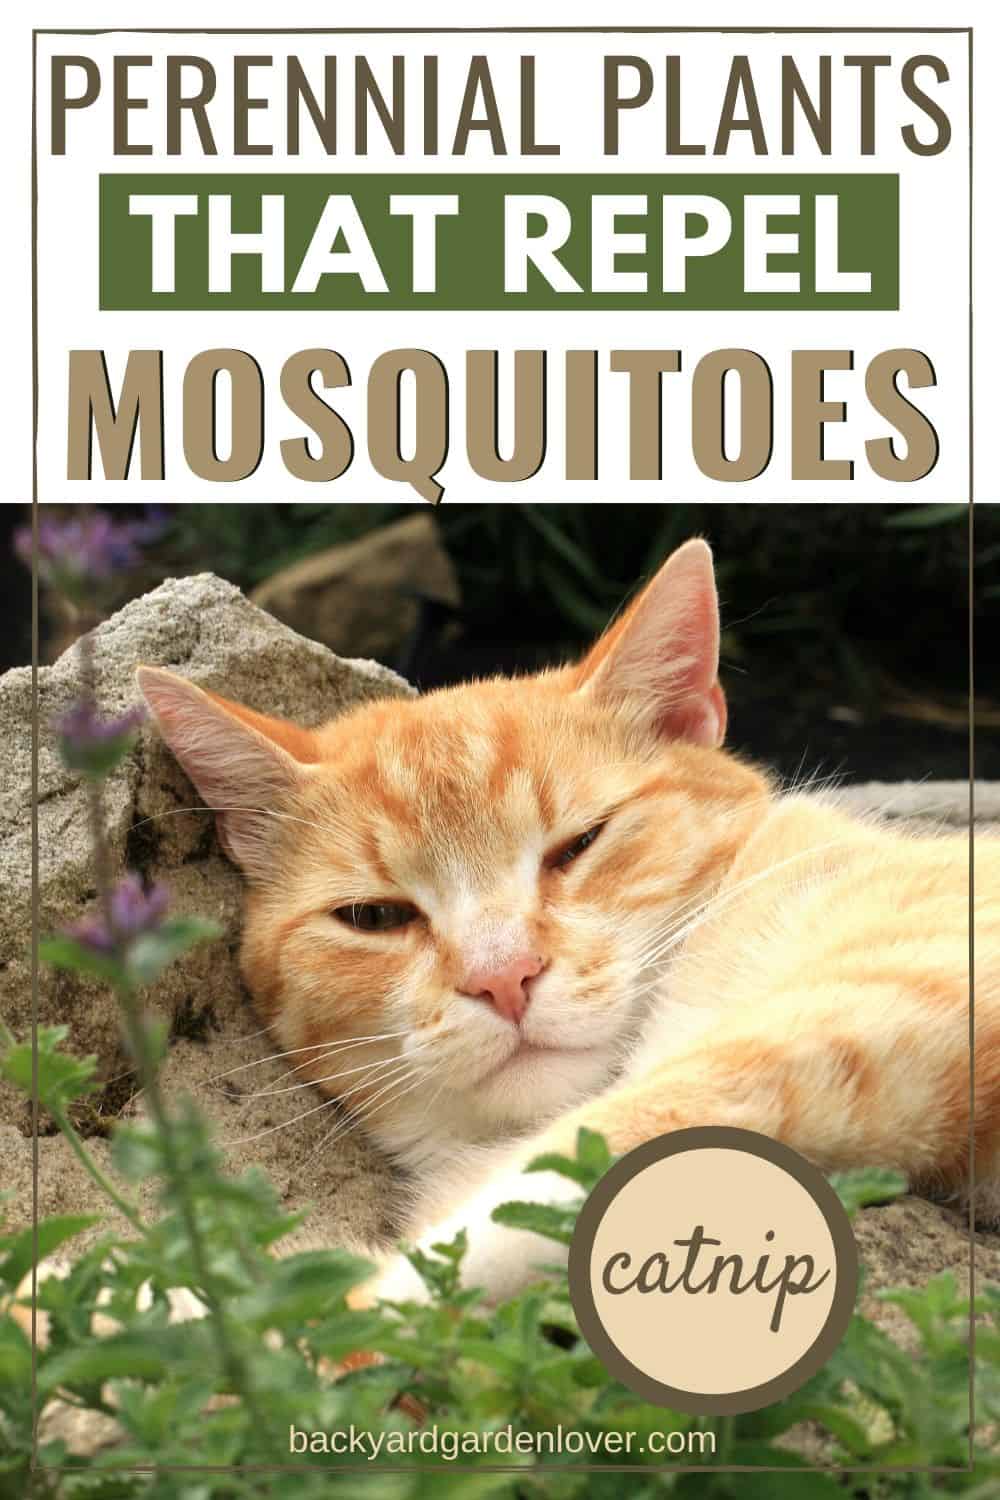 Perennial plants that repel mosquitoes